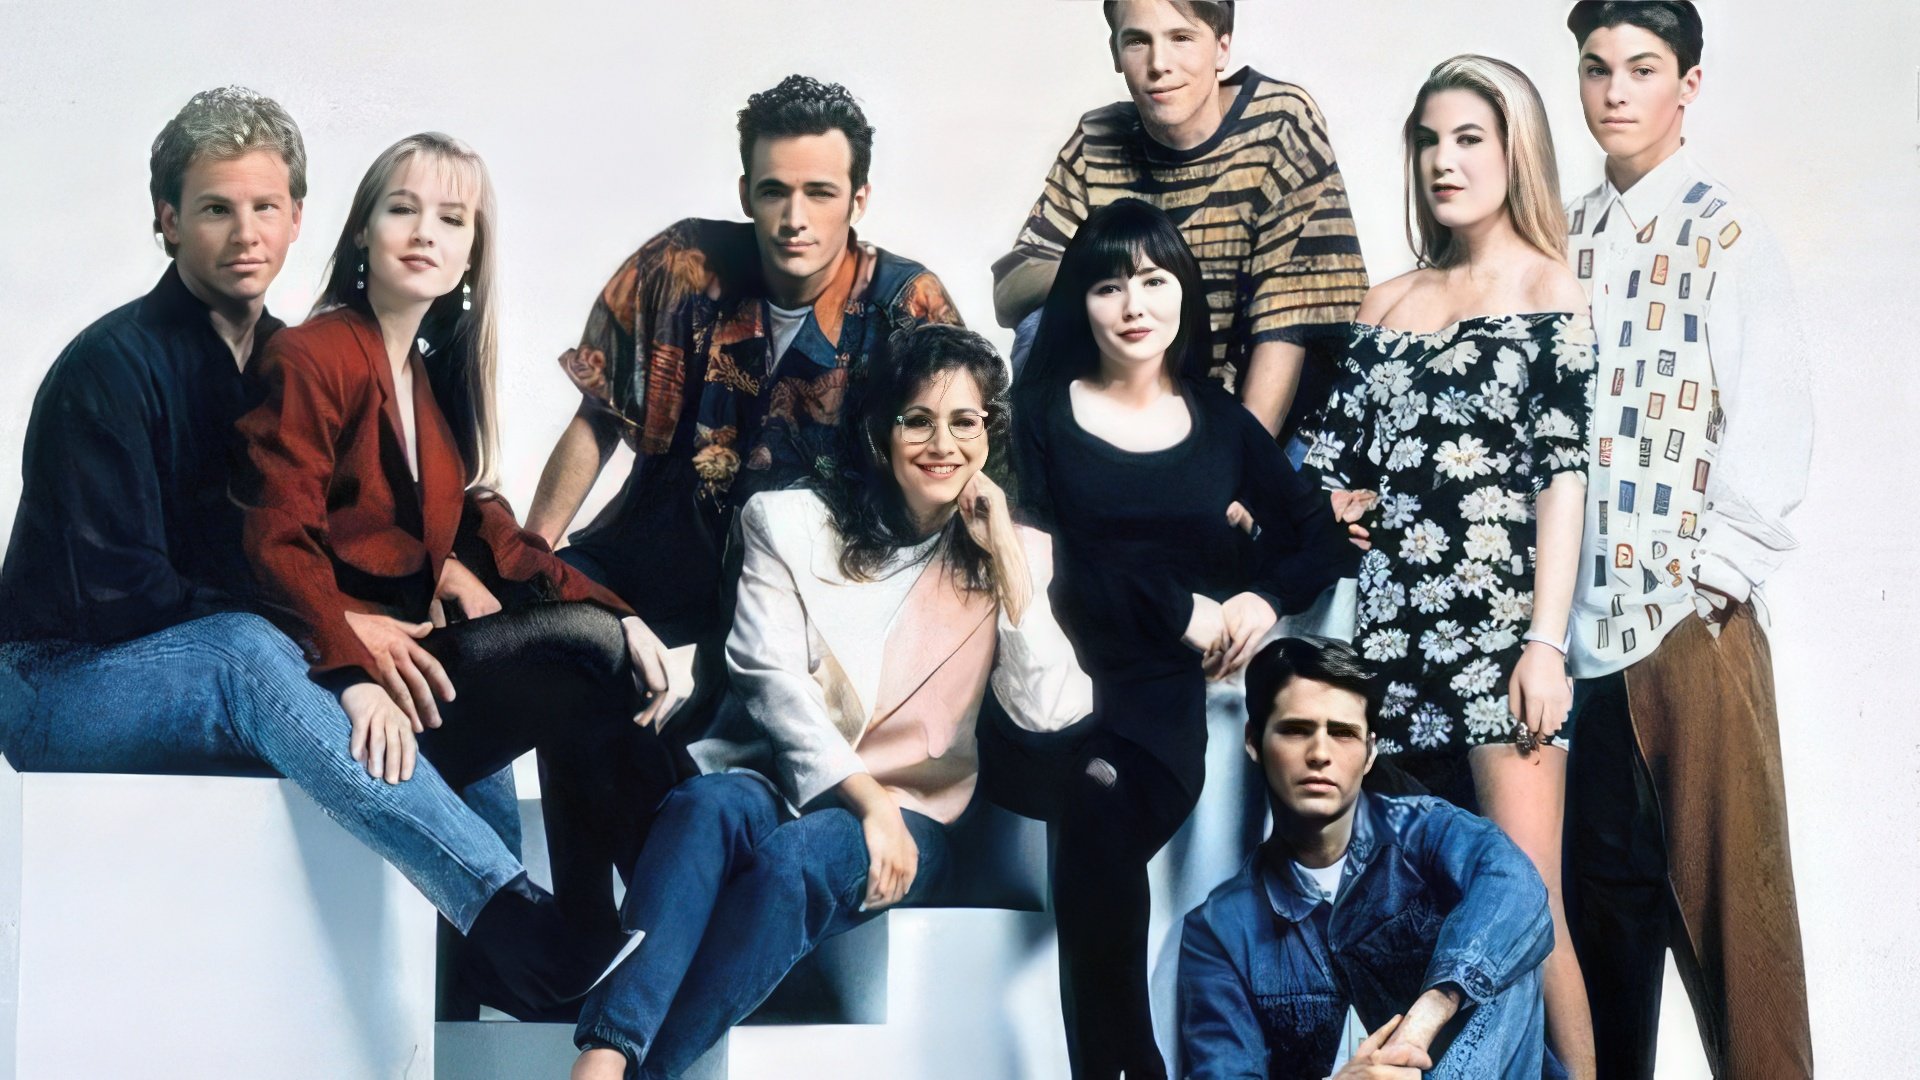 Luke Perry in the Beverly Hills, 90210 series